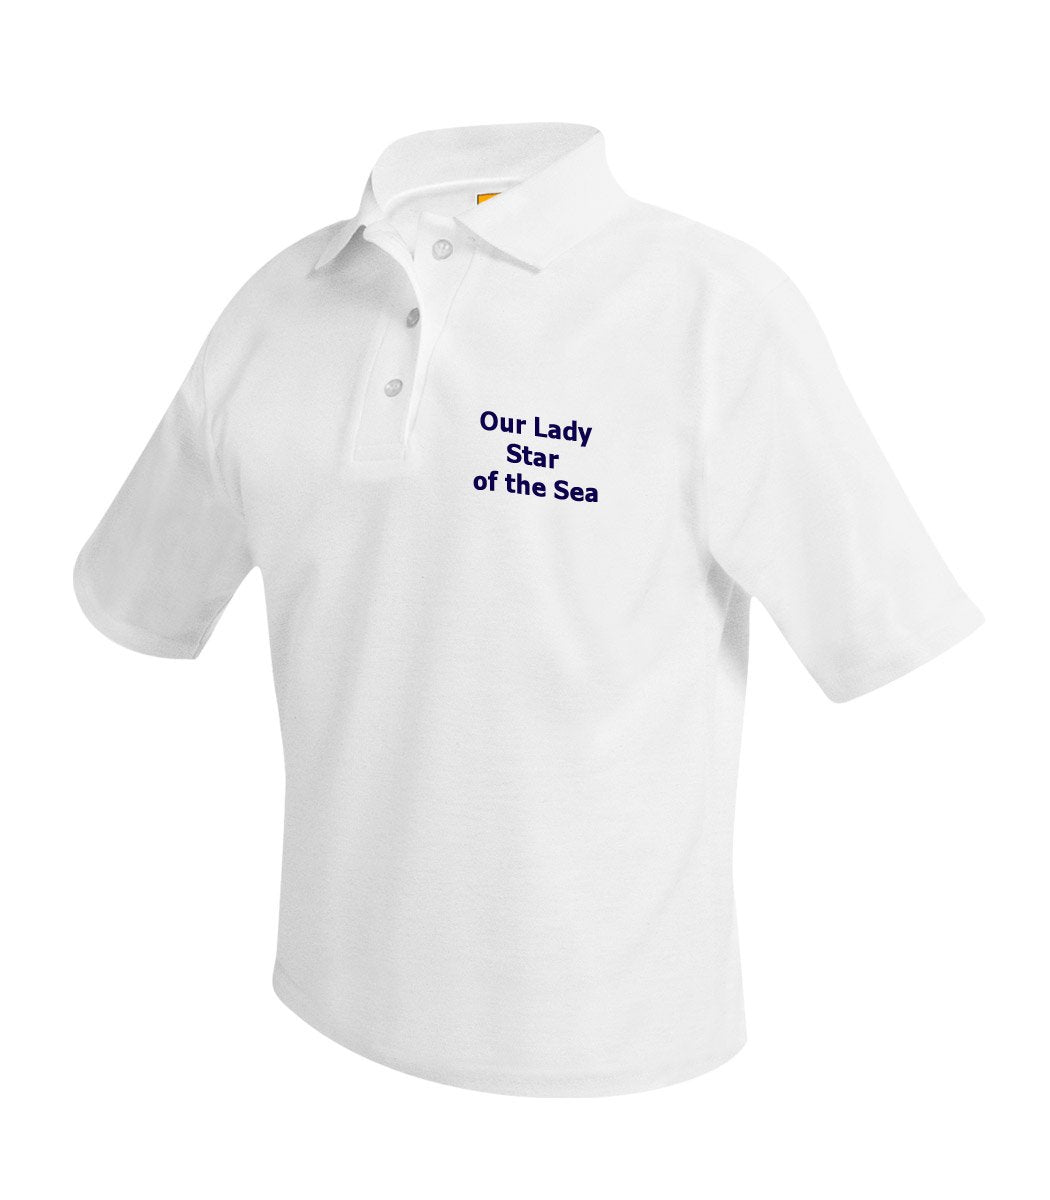 Our Lady Star of the Sea Short Sleeve Polo